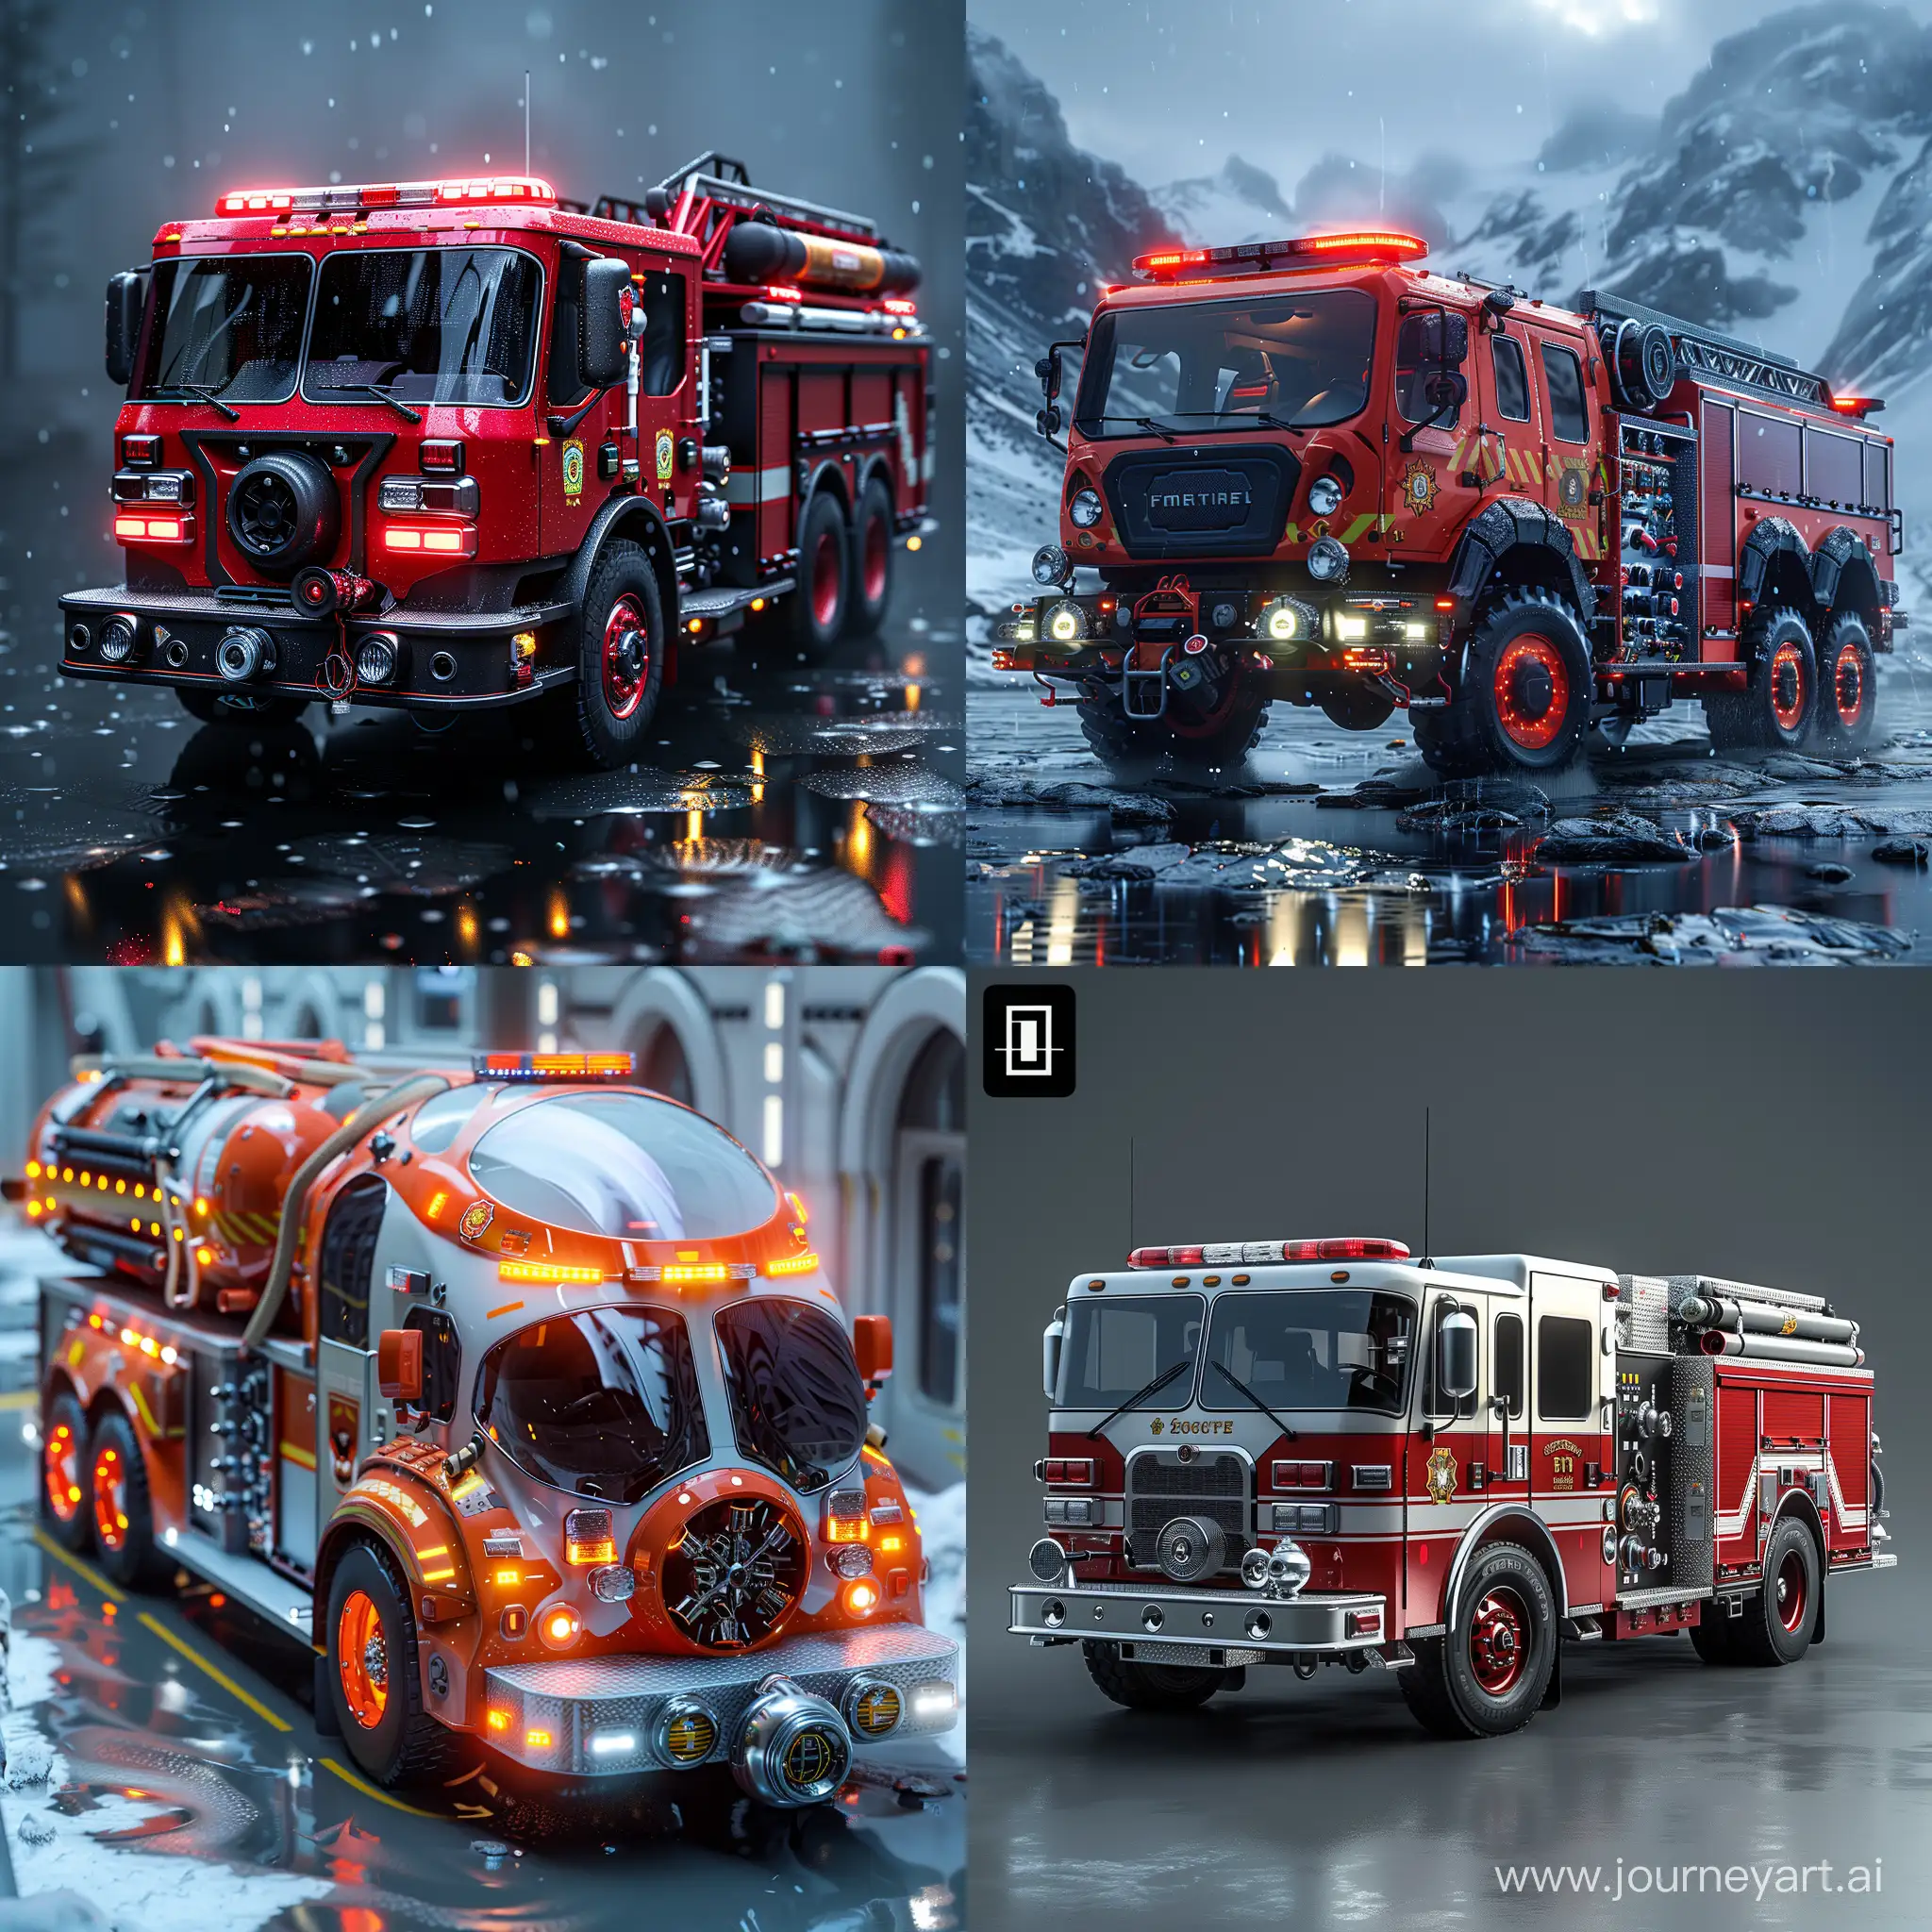 Futuristic-Fire-Truck-with-Lightweight-and-Durable-Design